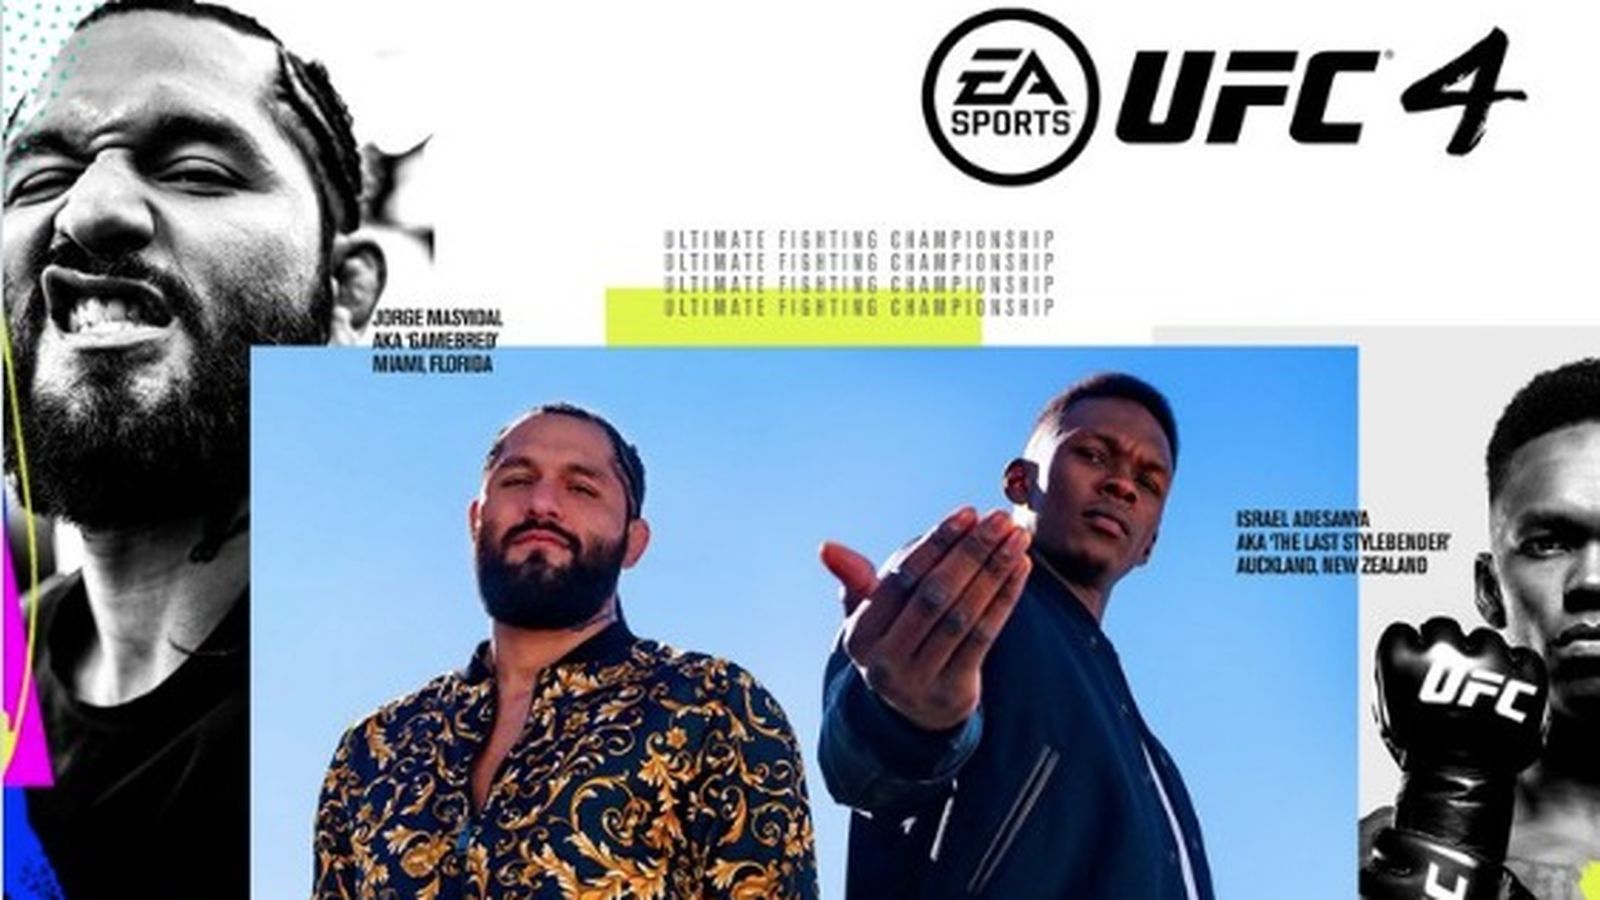 Watch official trailer for 'EA Sports UFC 4' video game, featuring